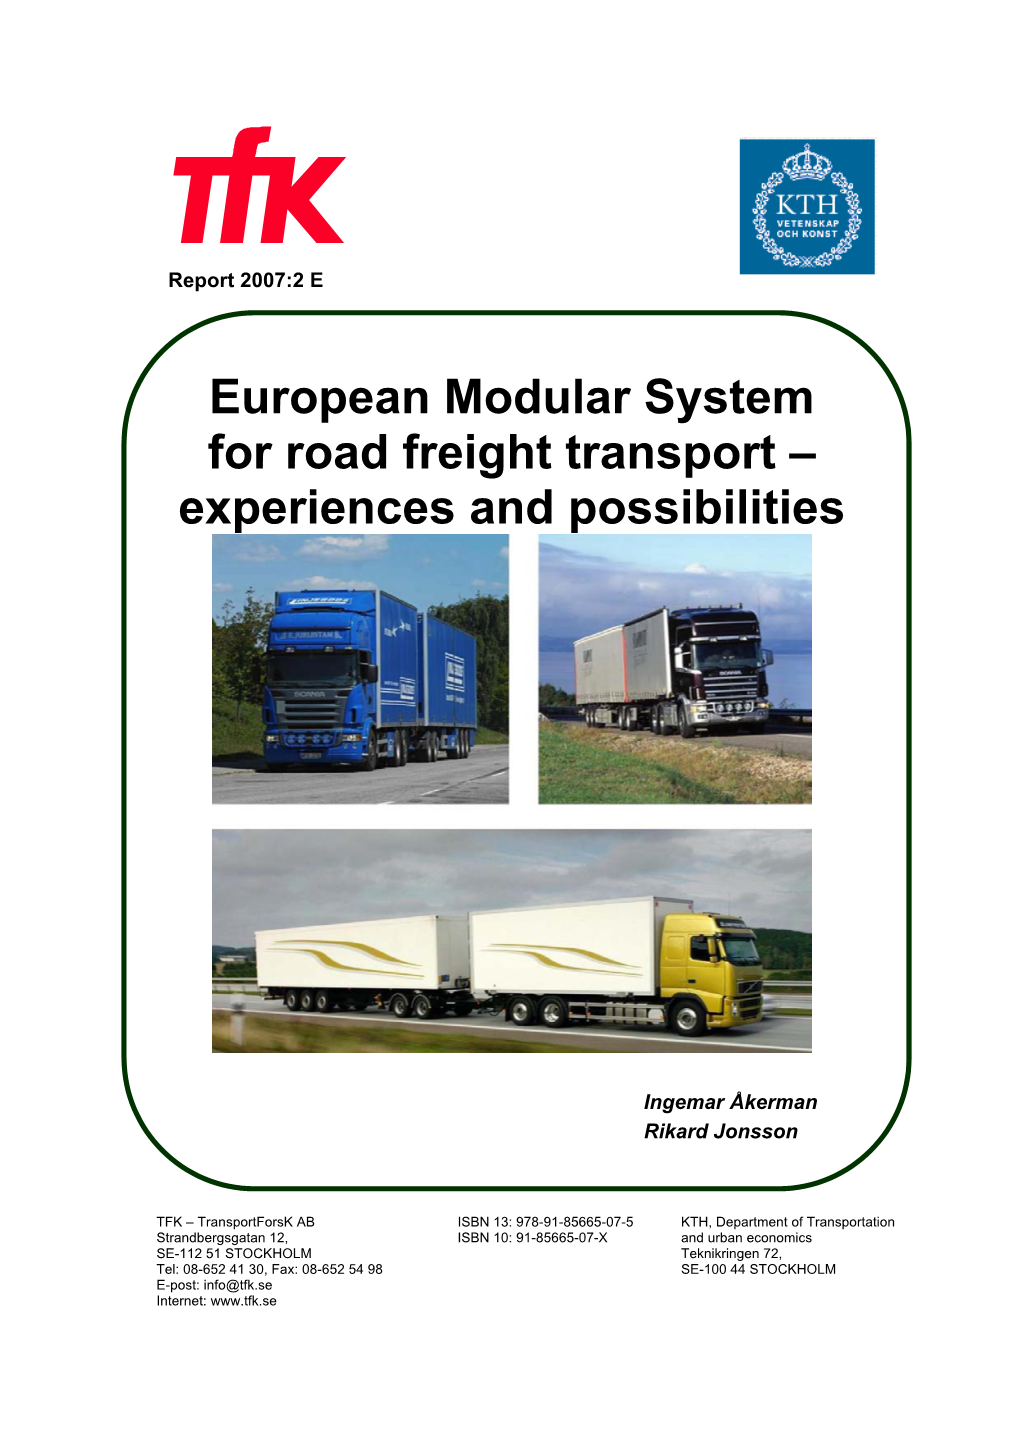 European Modular System for Road Freight Transport – Experiences and Possibilities